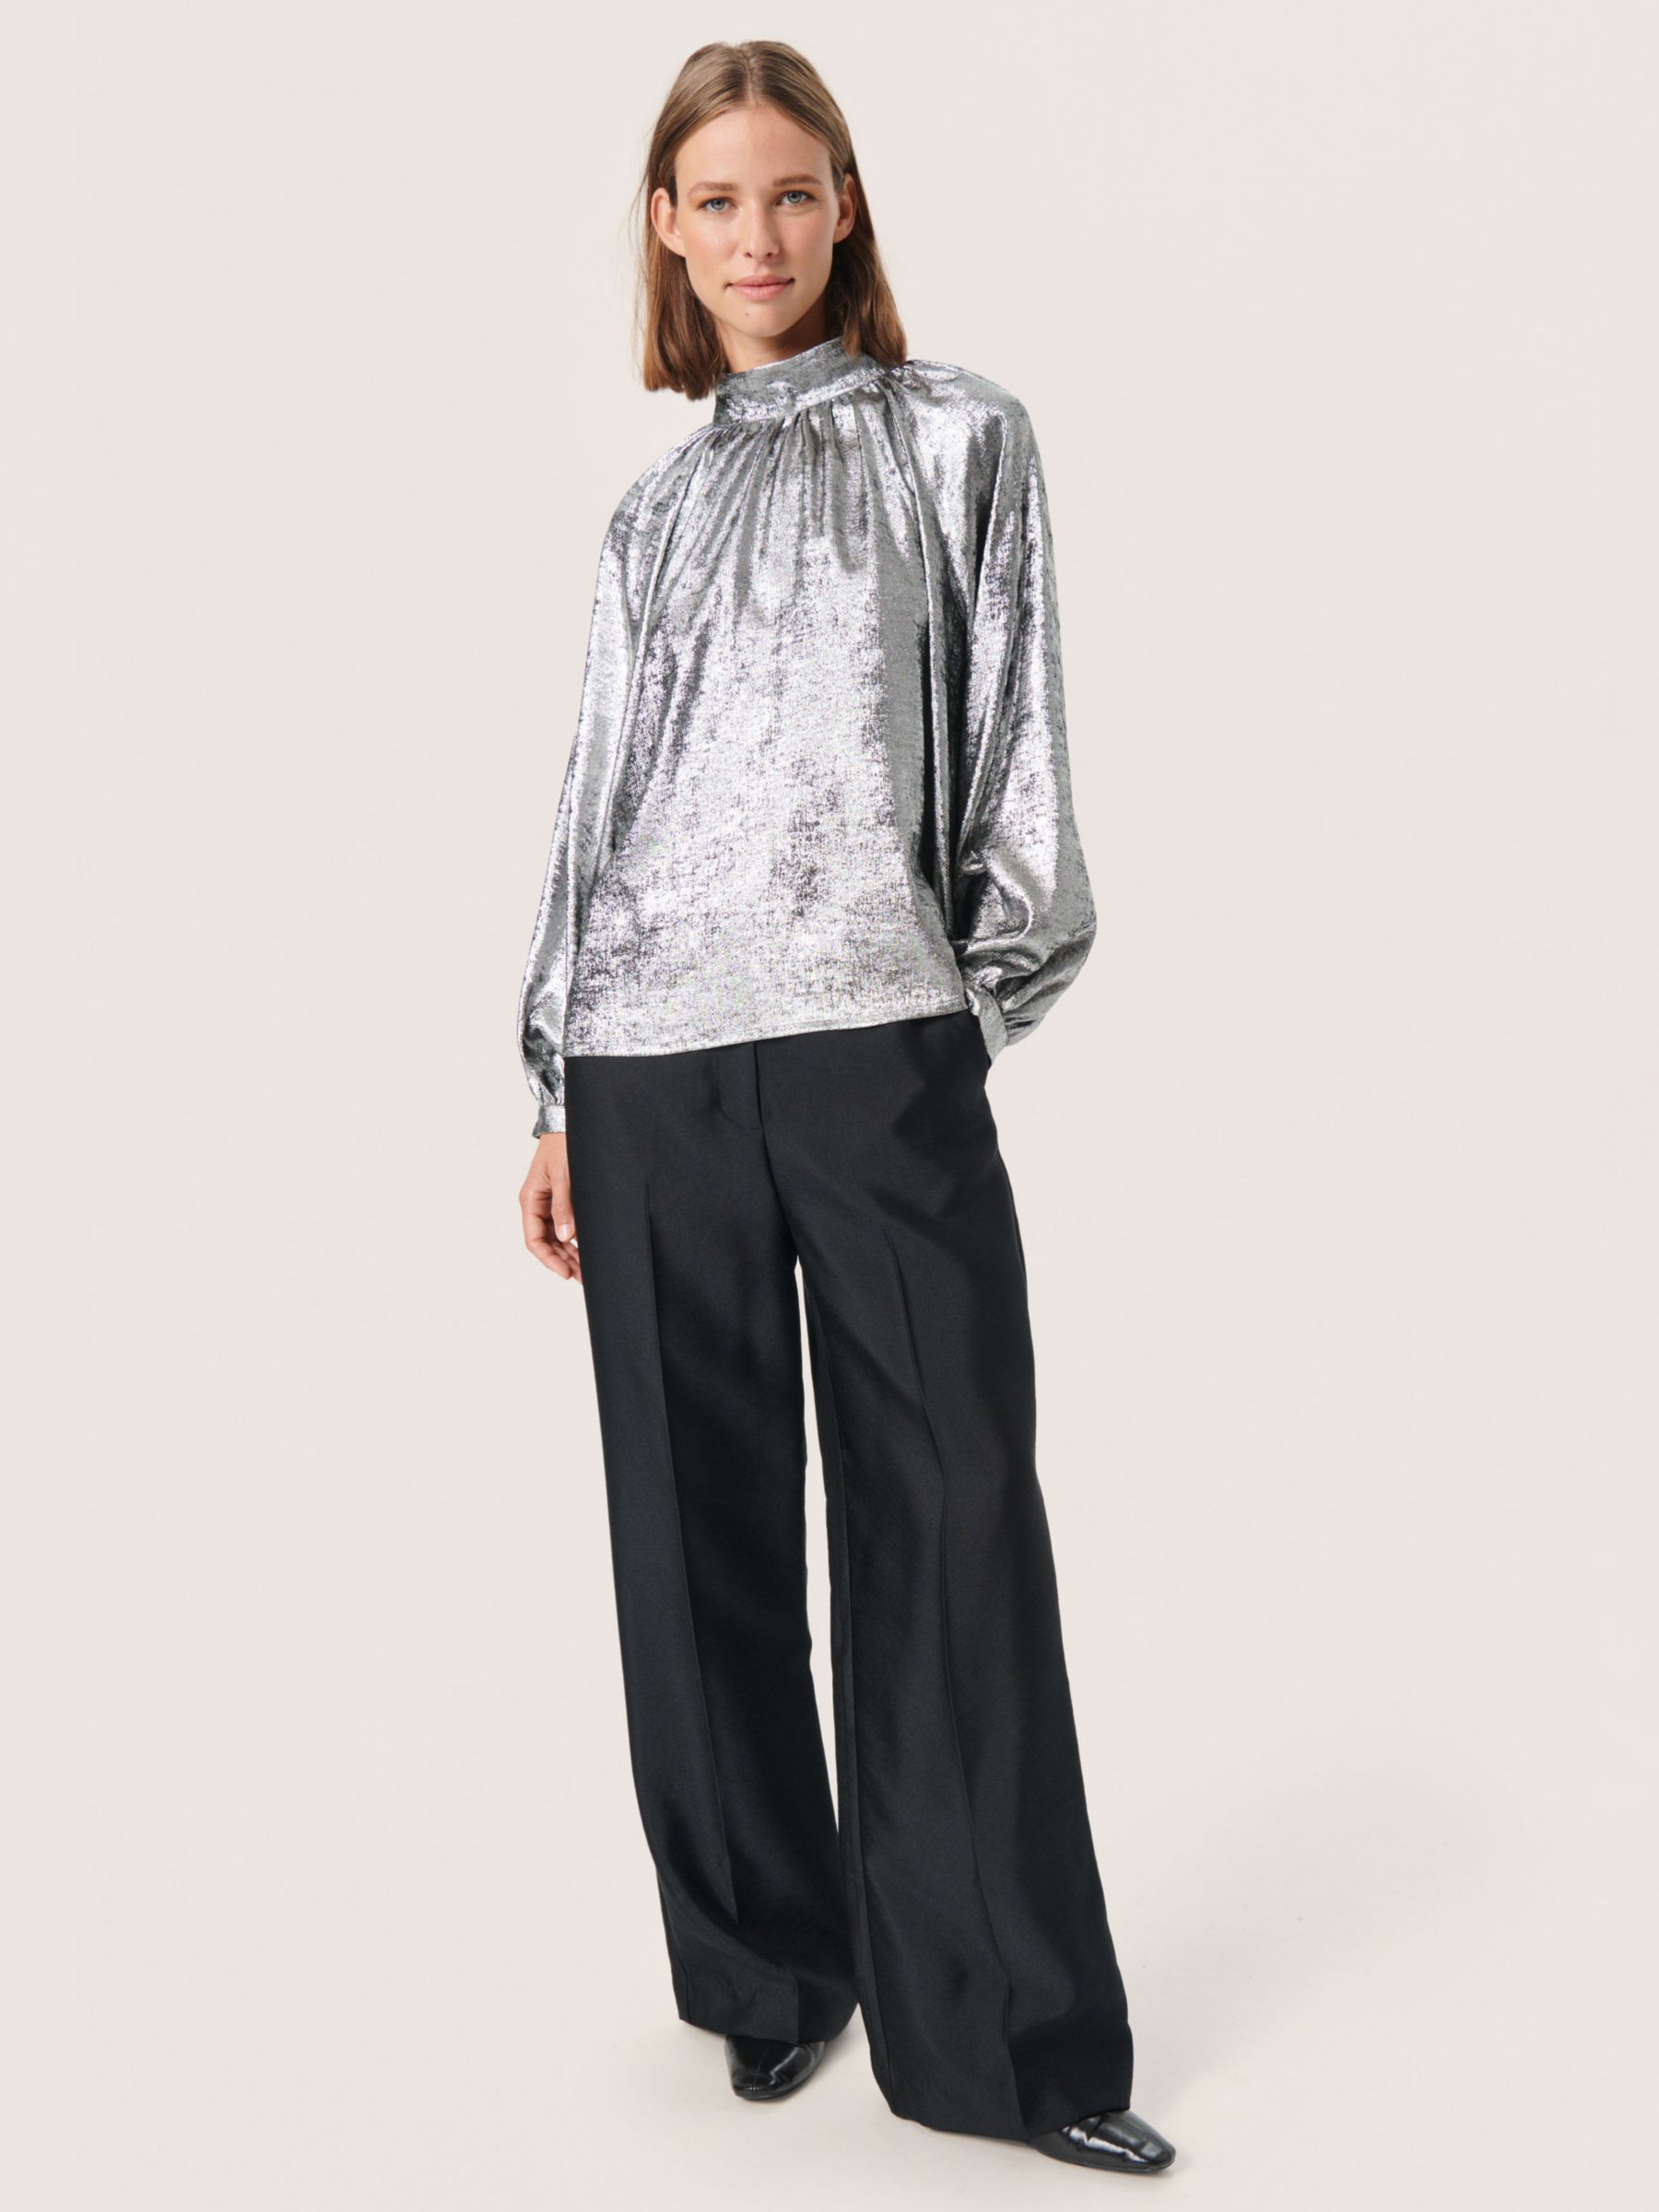 Buy Soaked In Luxury Ronya Blouse, Silver Foil Online at johnlewis.com